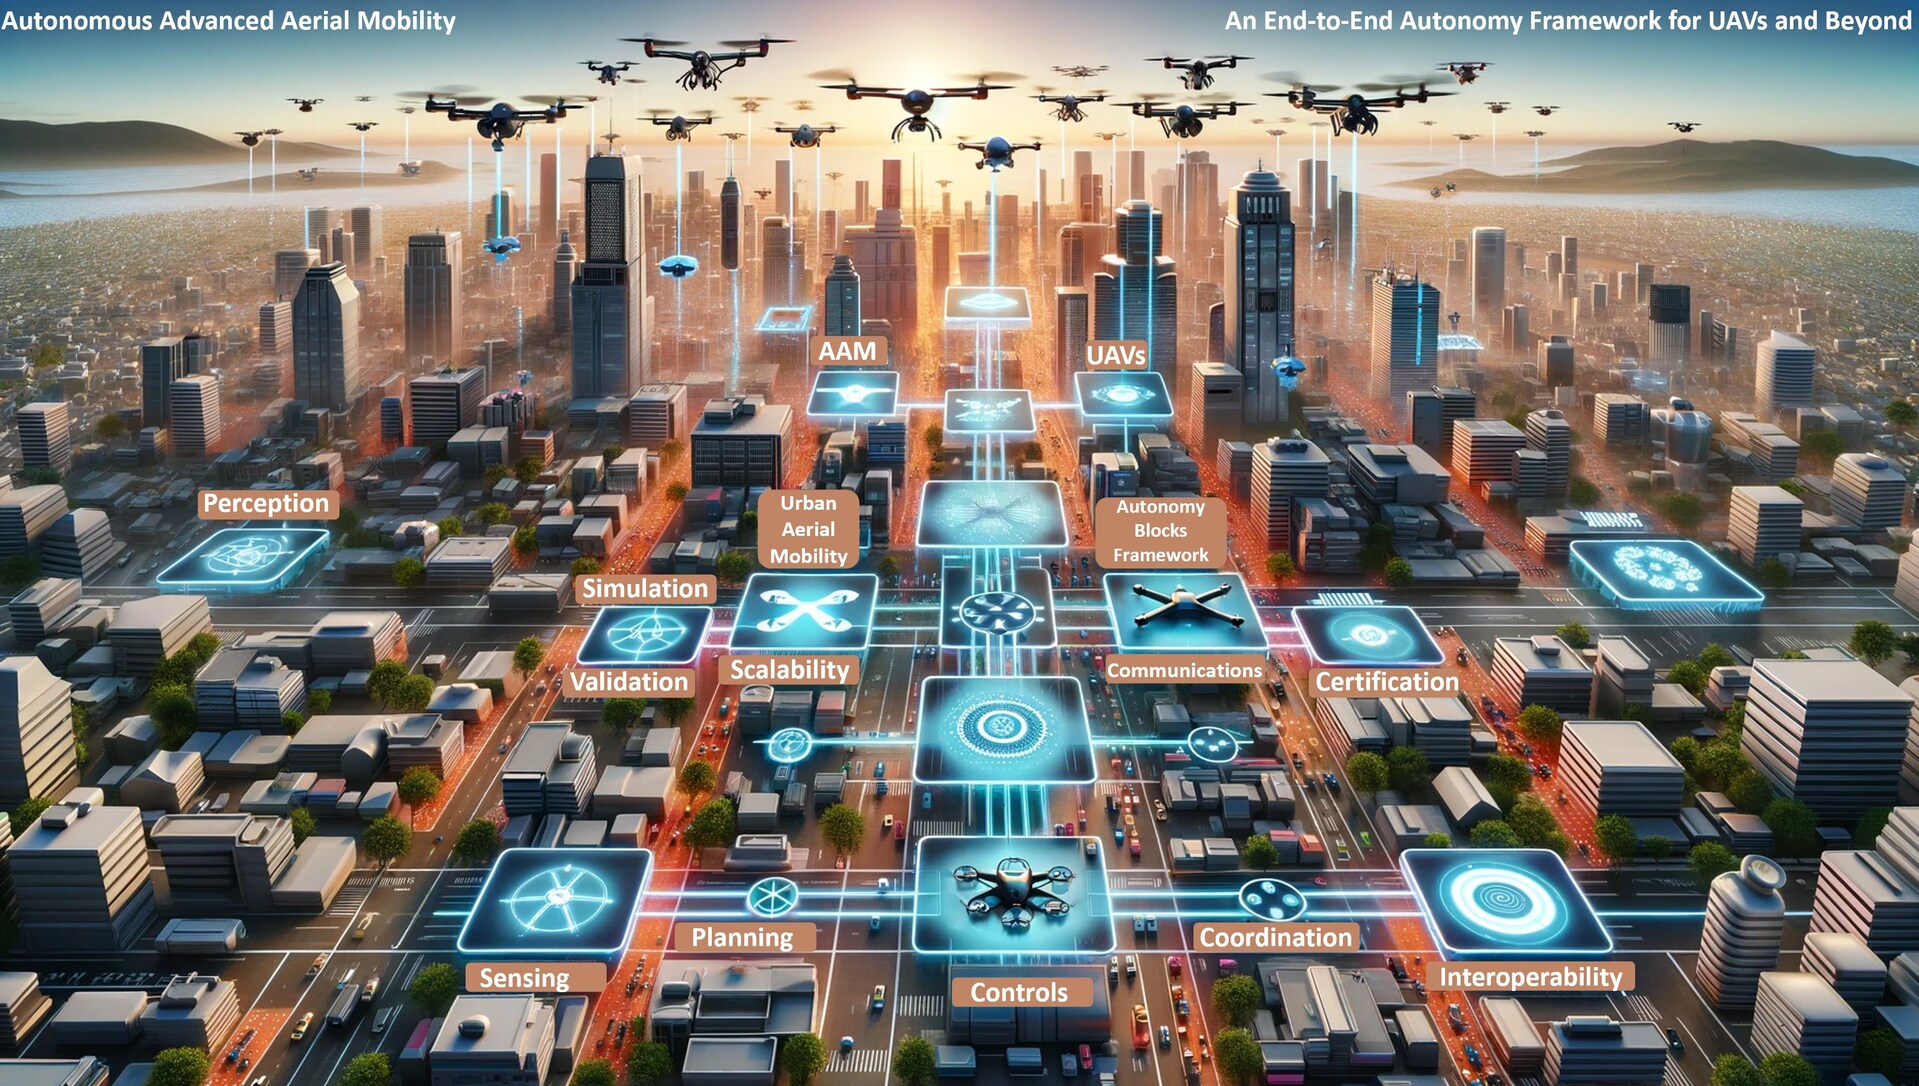 Skylines Redefined: Navigating the Future with UAVs and Autonomy Blocks